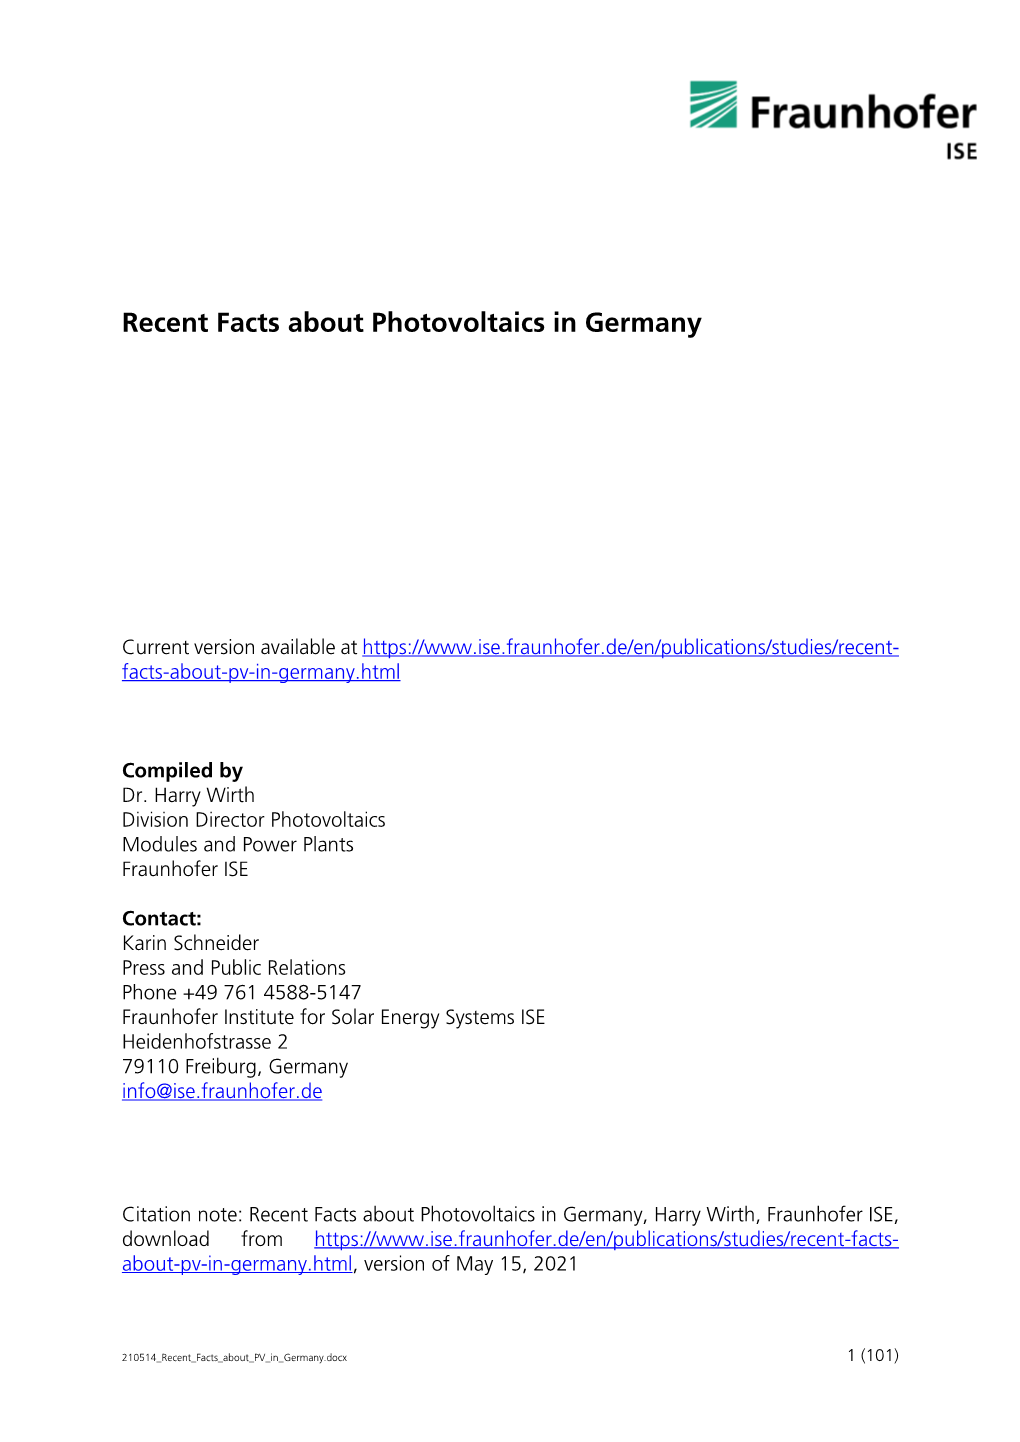 Recent Facts About Photovoltaics in Germany